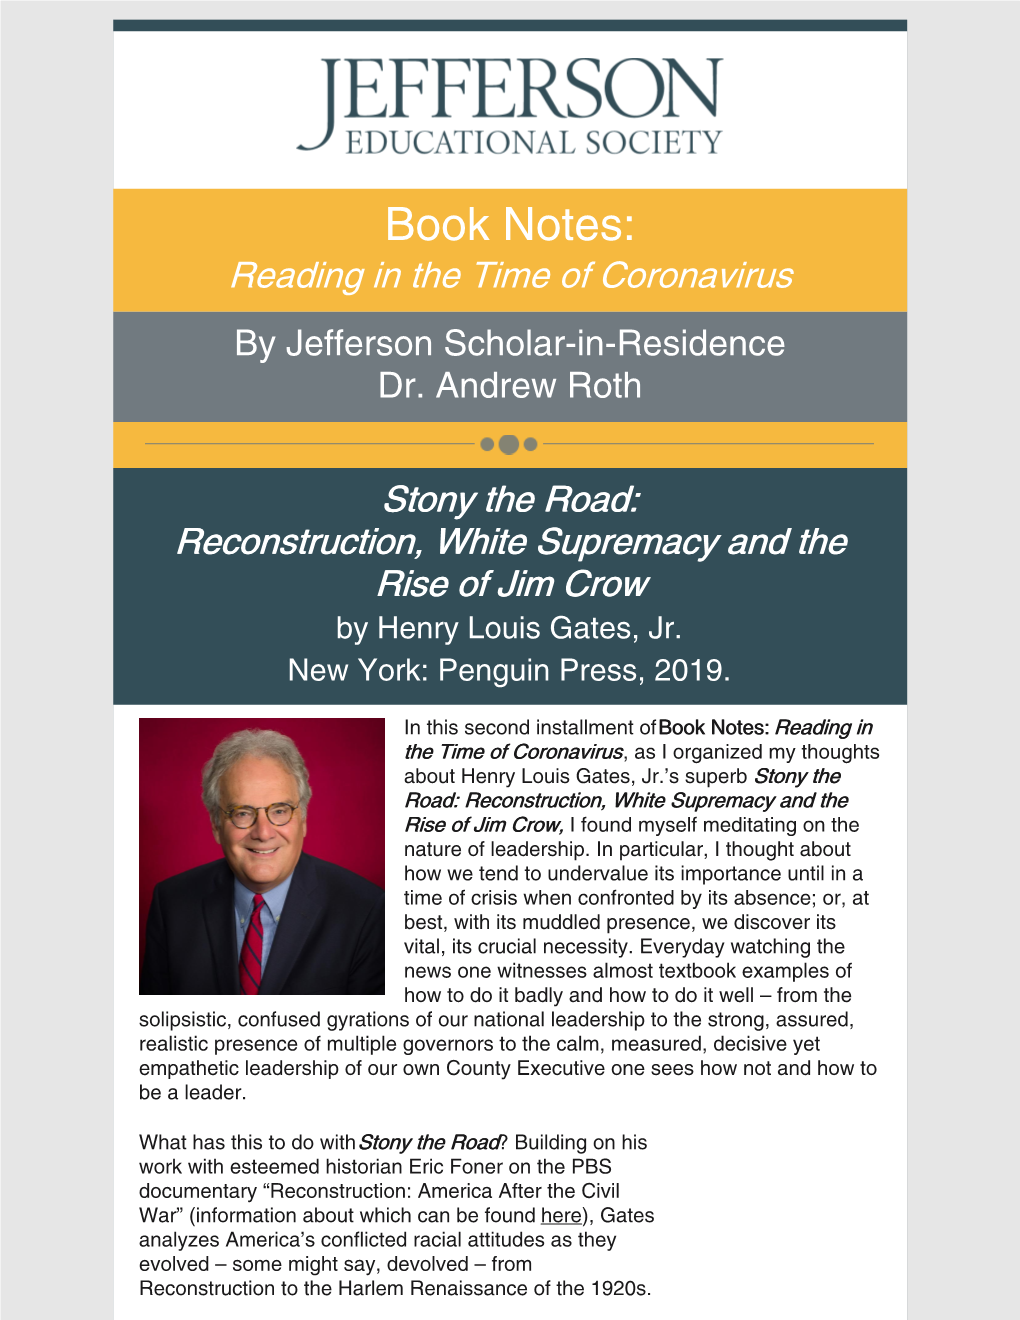 Book Notes: Reading in the Time of Coronavirus by Jefferson Scholar-In-Residence Dr